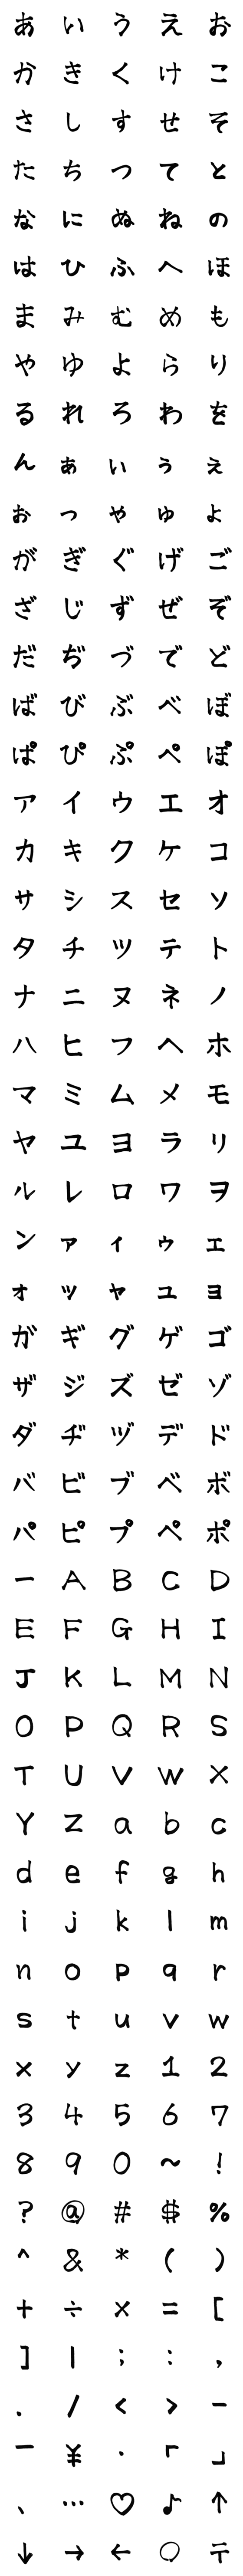 [LINE絵文字]筆文字で動く絵文字【265個の大量‼︎】の画像一覧